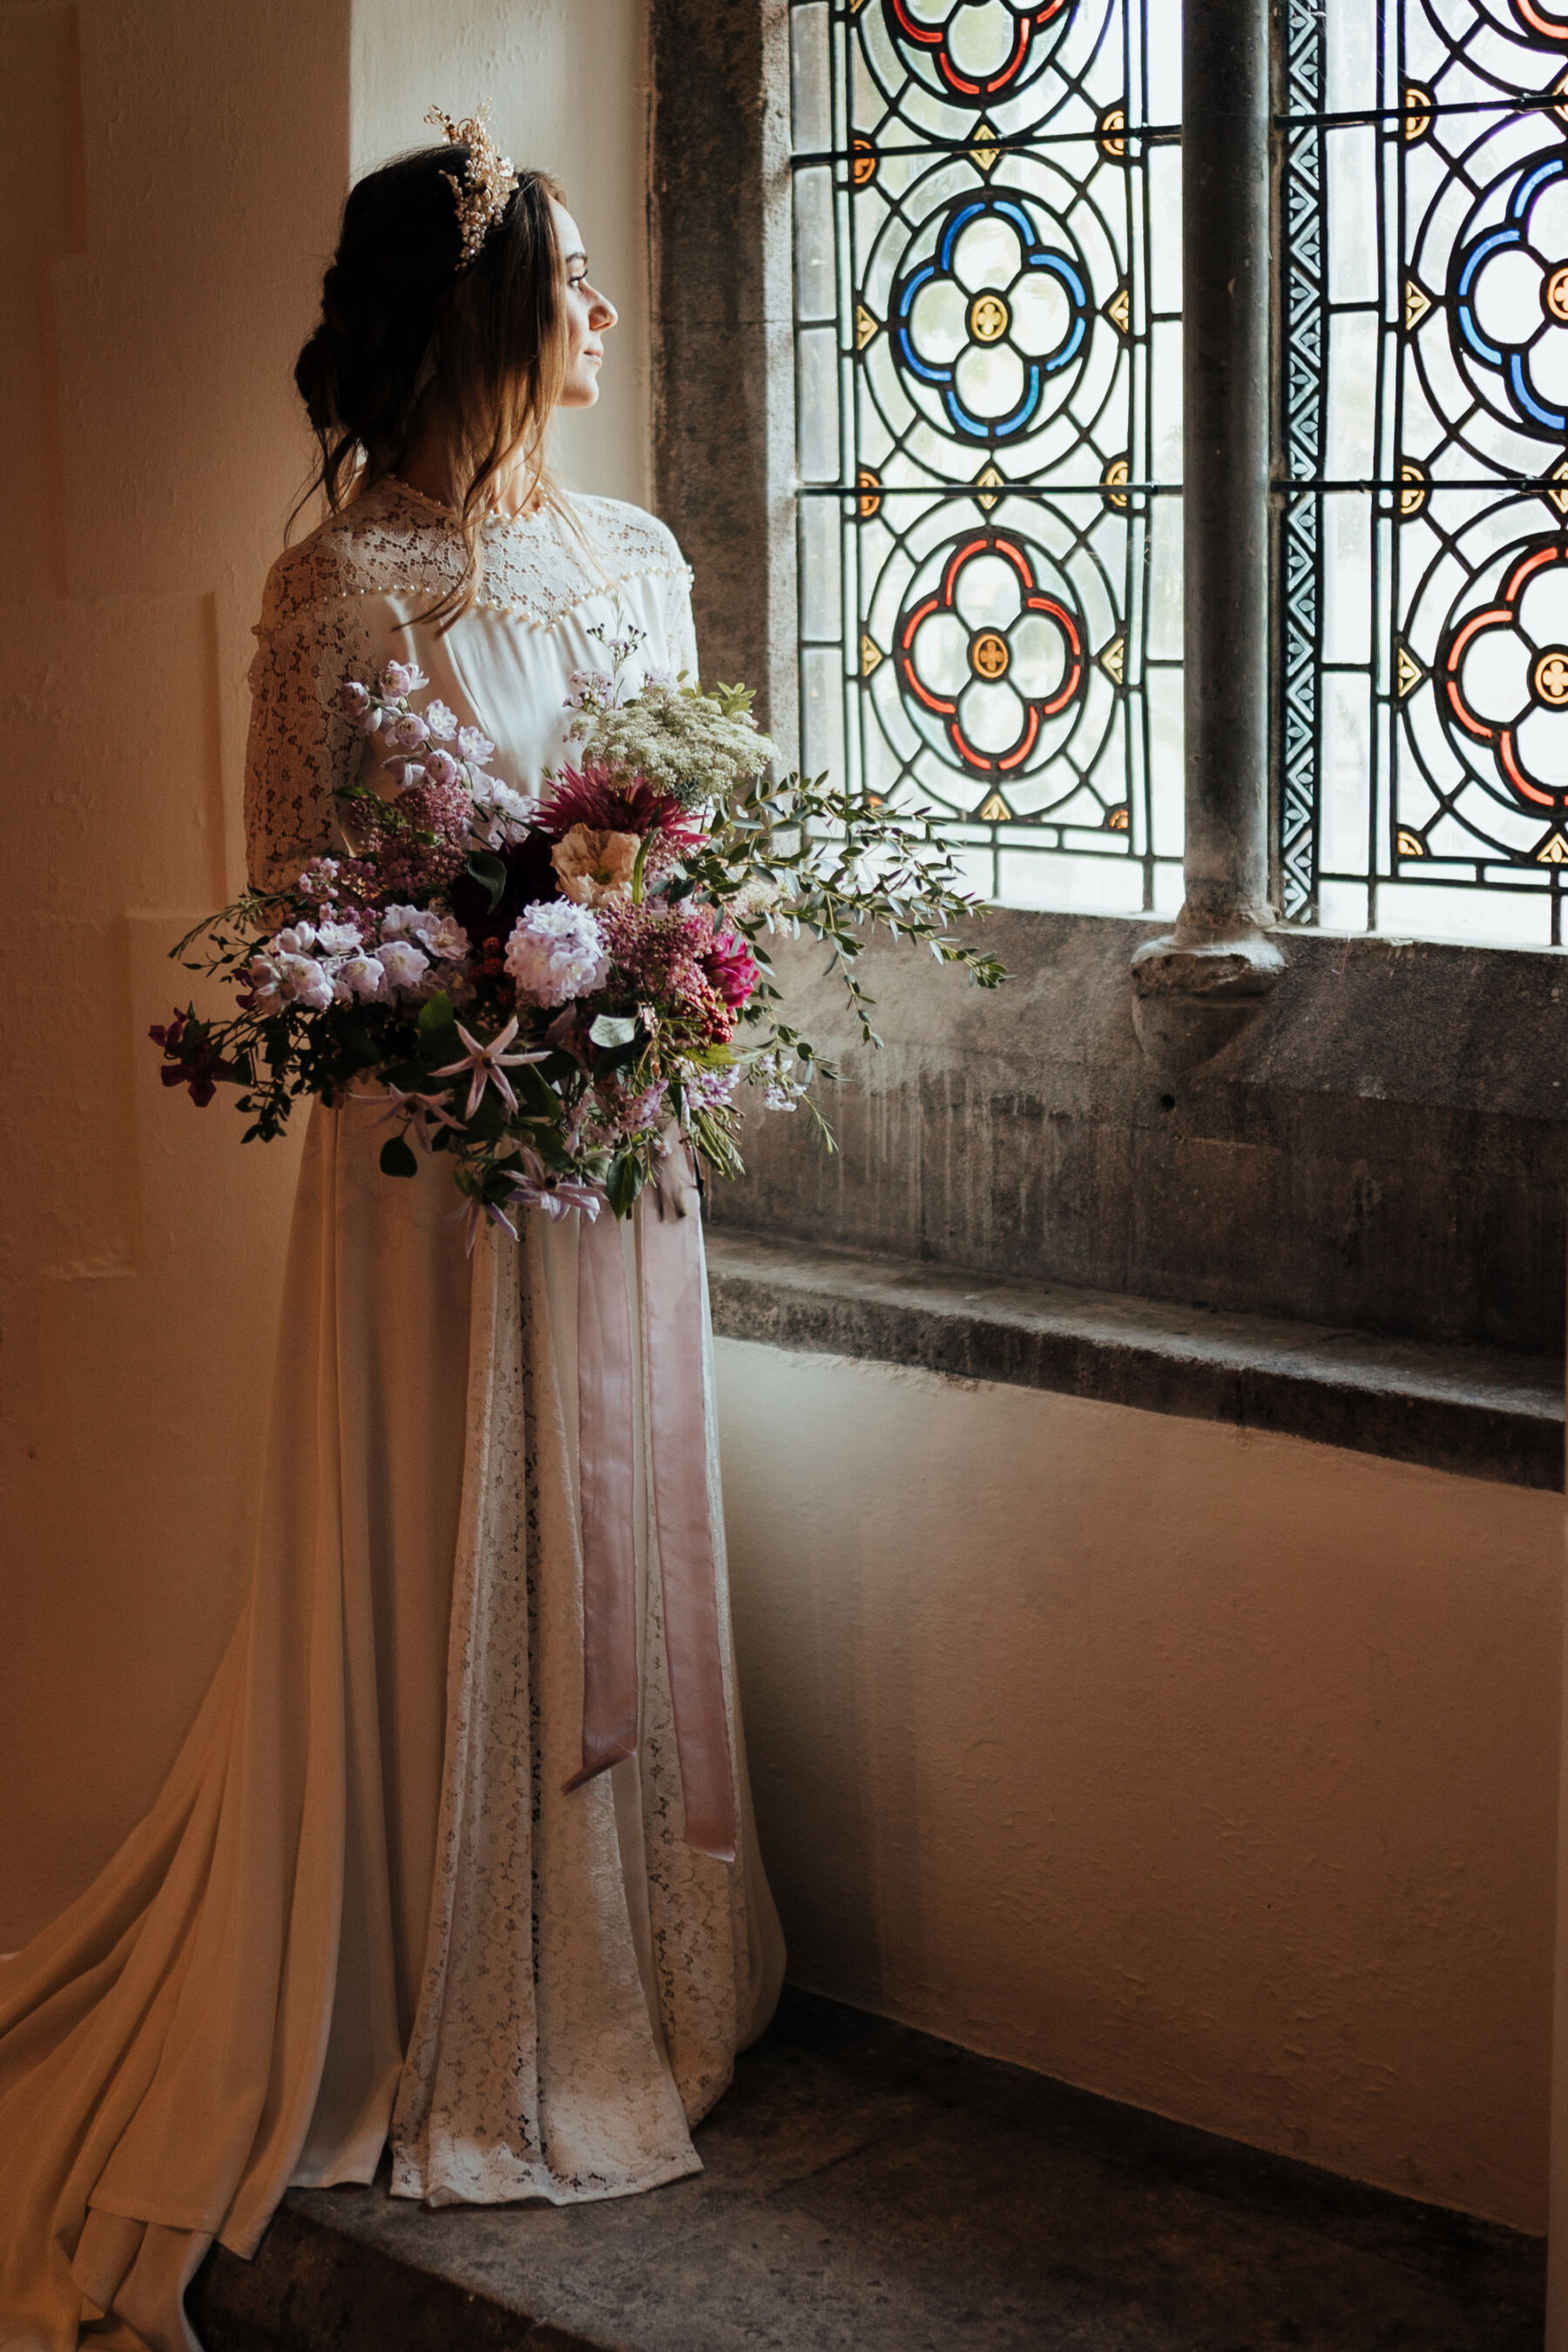 Bride wearing a vintage lace wedding dress and a bridal crown & carrying a large colourful summer bouquet. Bishop's Palace historic wedding venue in Wells, Somerset.